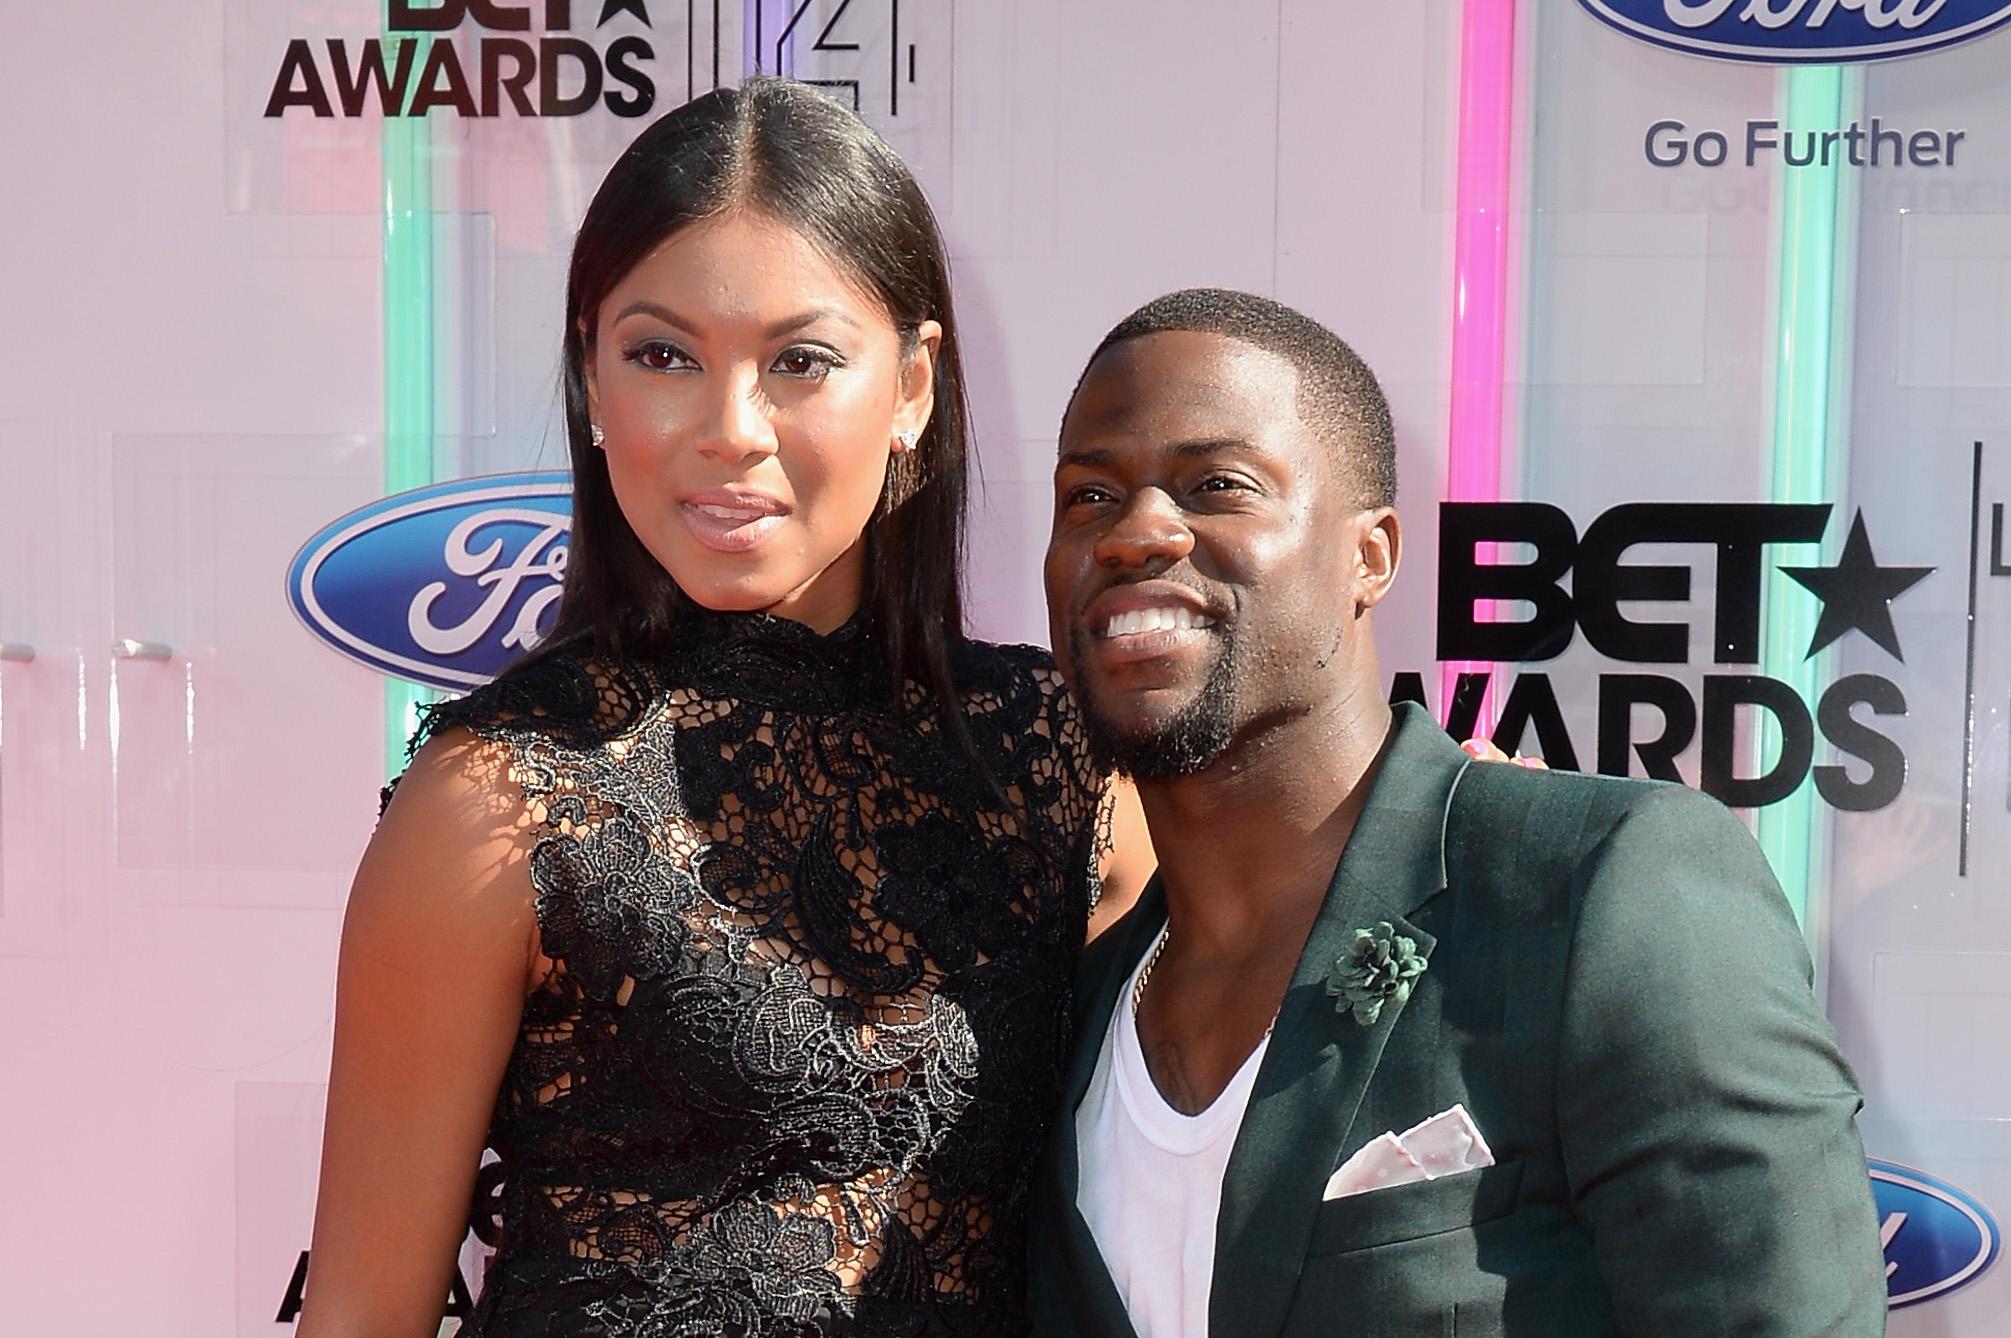 Kevin Hart Ties The Knot With Longtime Girlfriend 99.3105.7 Kiss FM